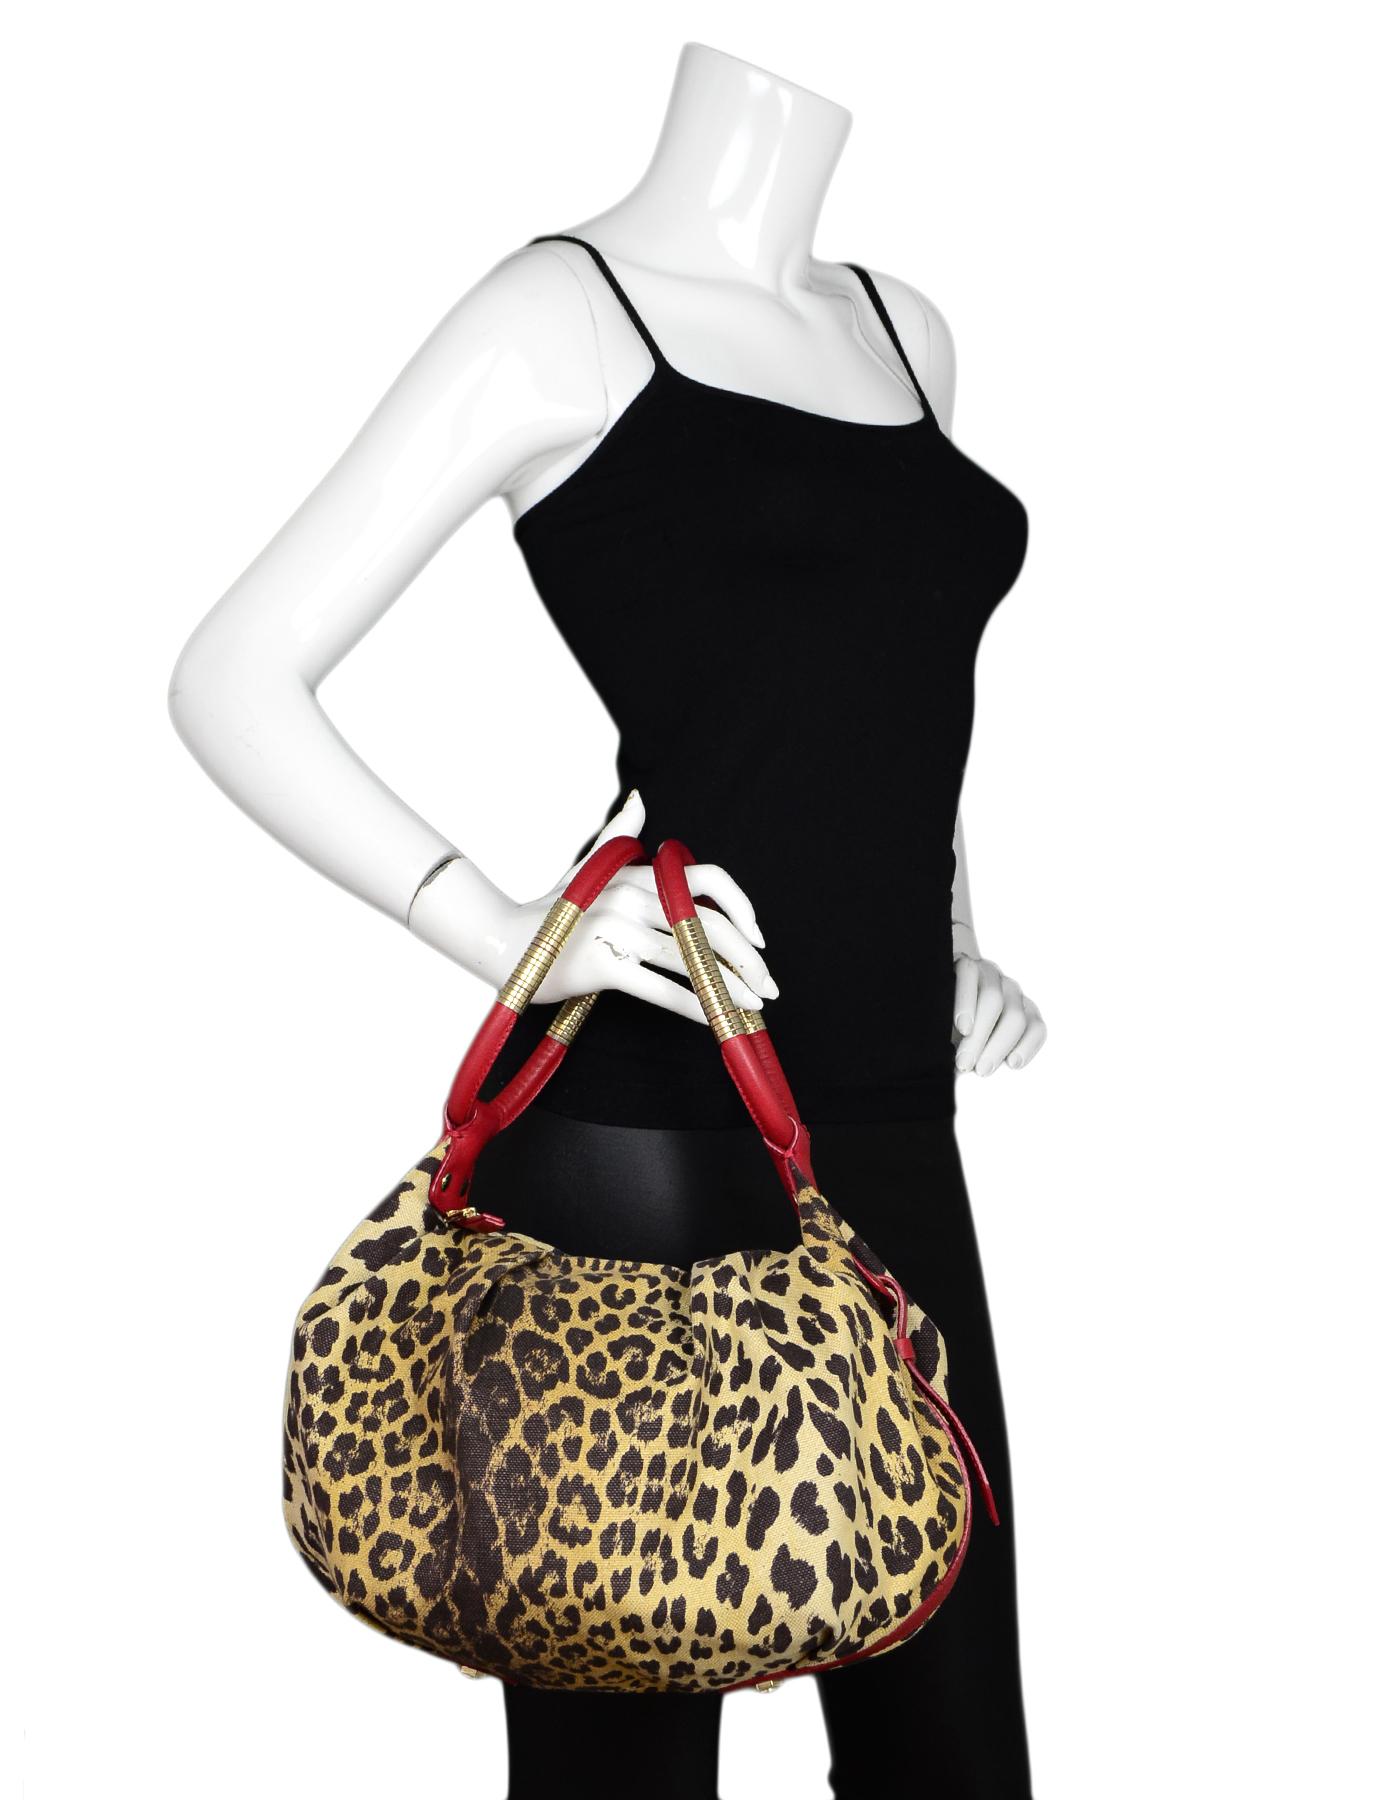 Cesare Paciotti Canvas Leopard Print Bag W/ Red Leather Trim 

Made In: Italy 
Color: Brown/tan, and red
Hardware: Goldtone
Materials: Canvas, leather, metal
Lining: Red satin textile
Closure/Opening: Zip top
Exterior Pockets: None
Interior Pockets: